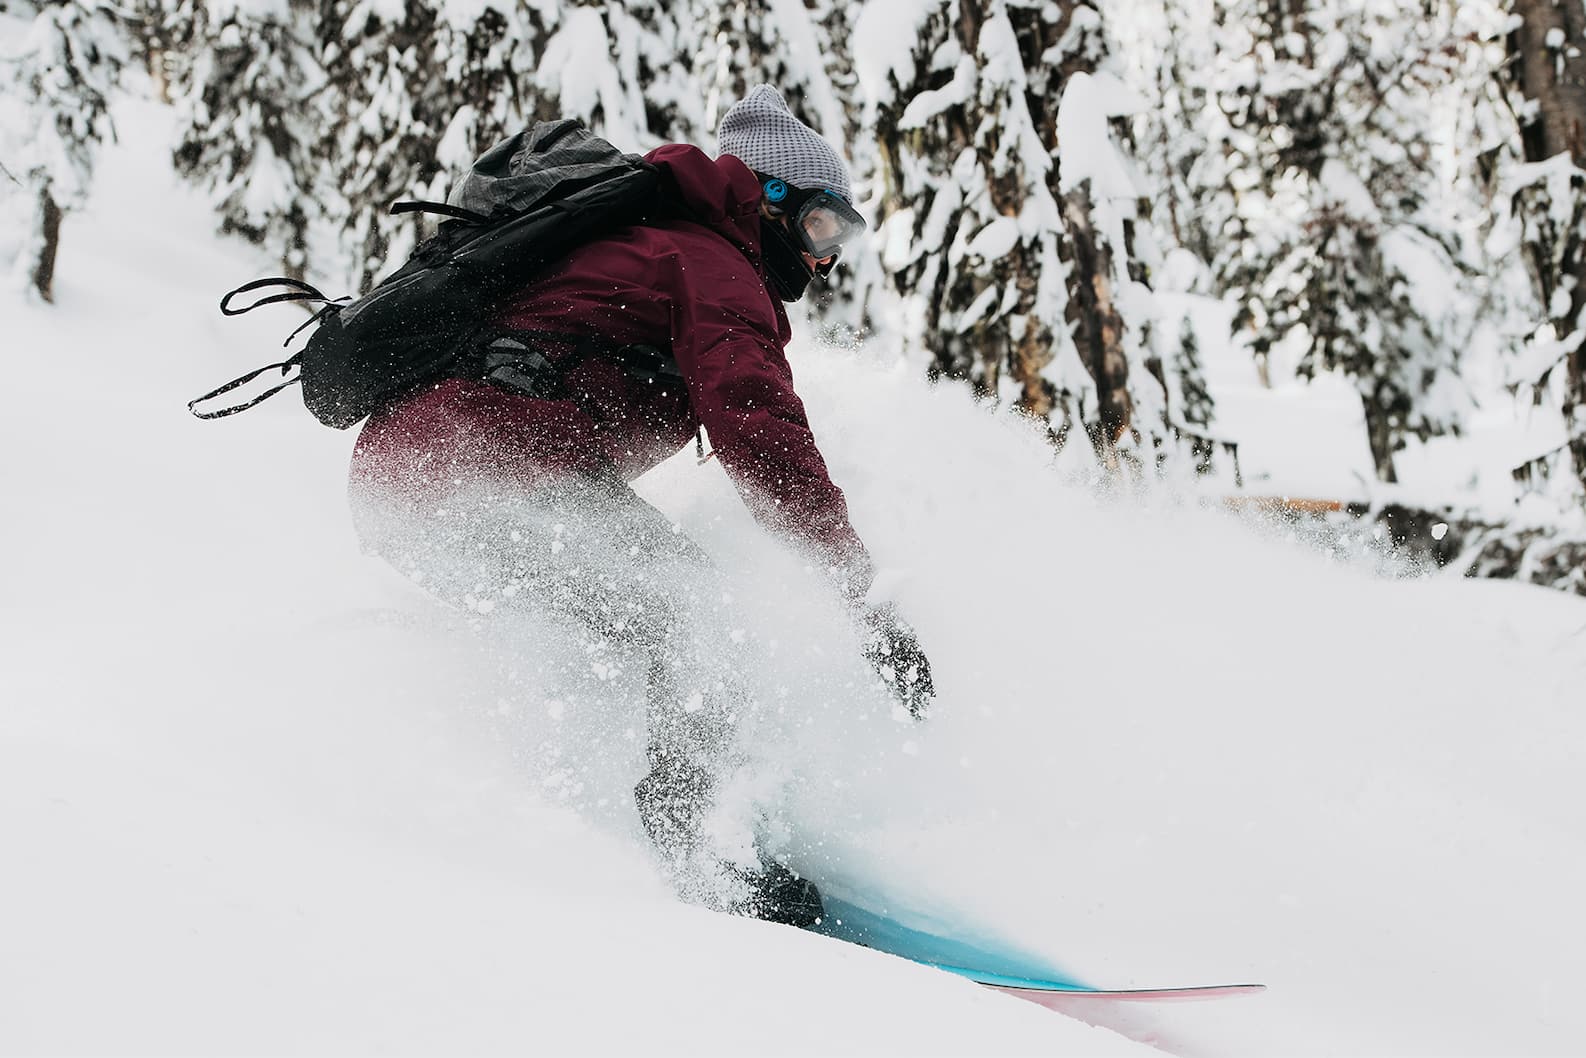 Powder Surfing 101: Getting Started with the Burton Backseat Driver | Burton  Snowboards